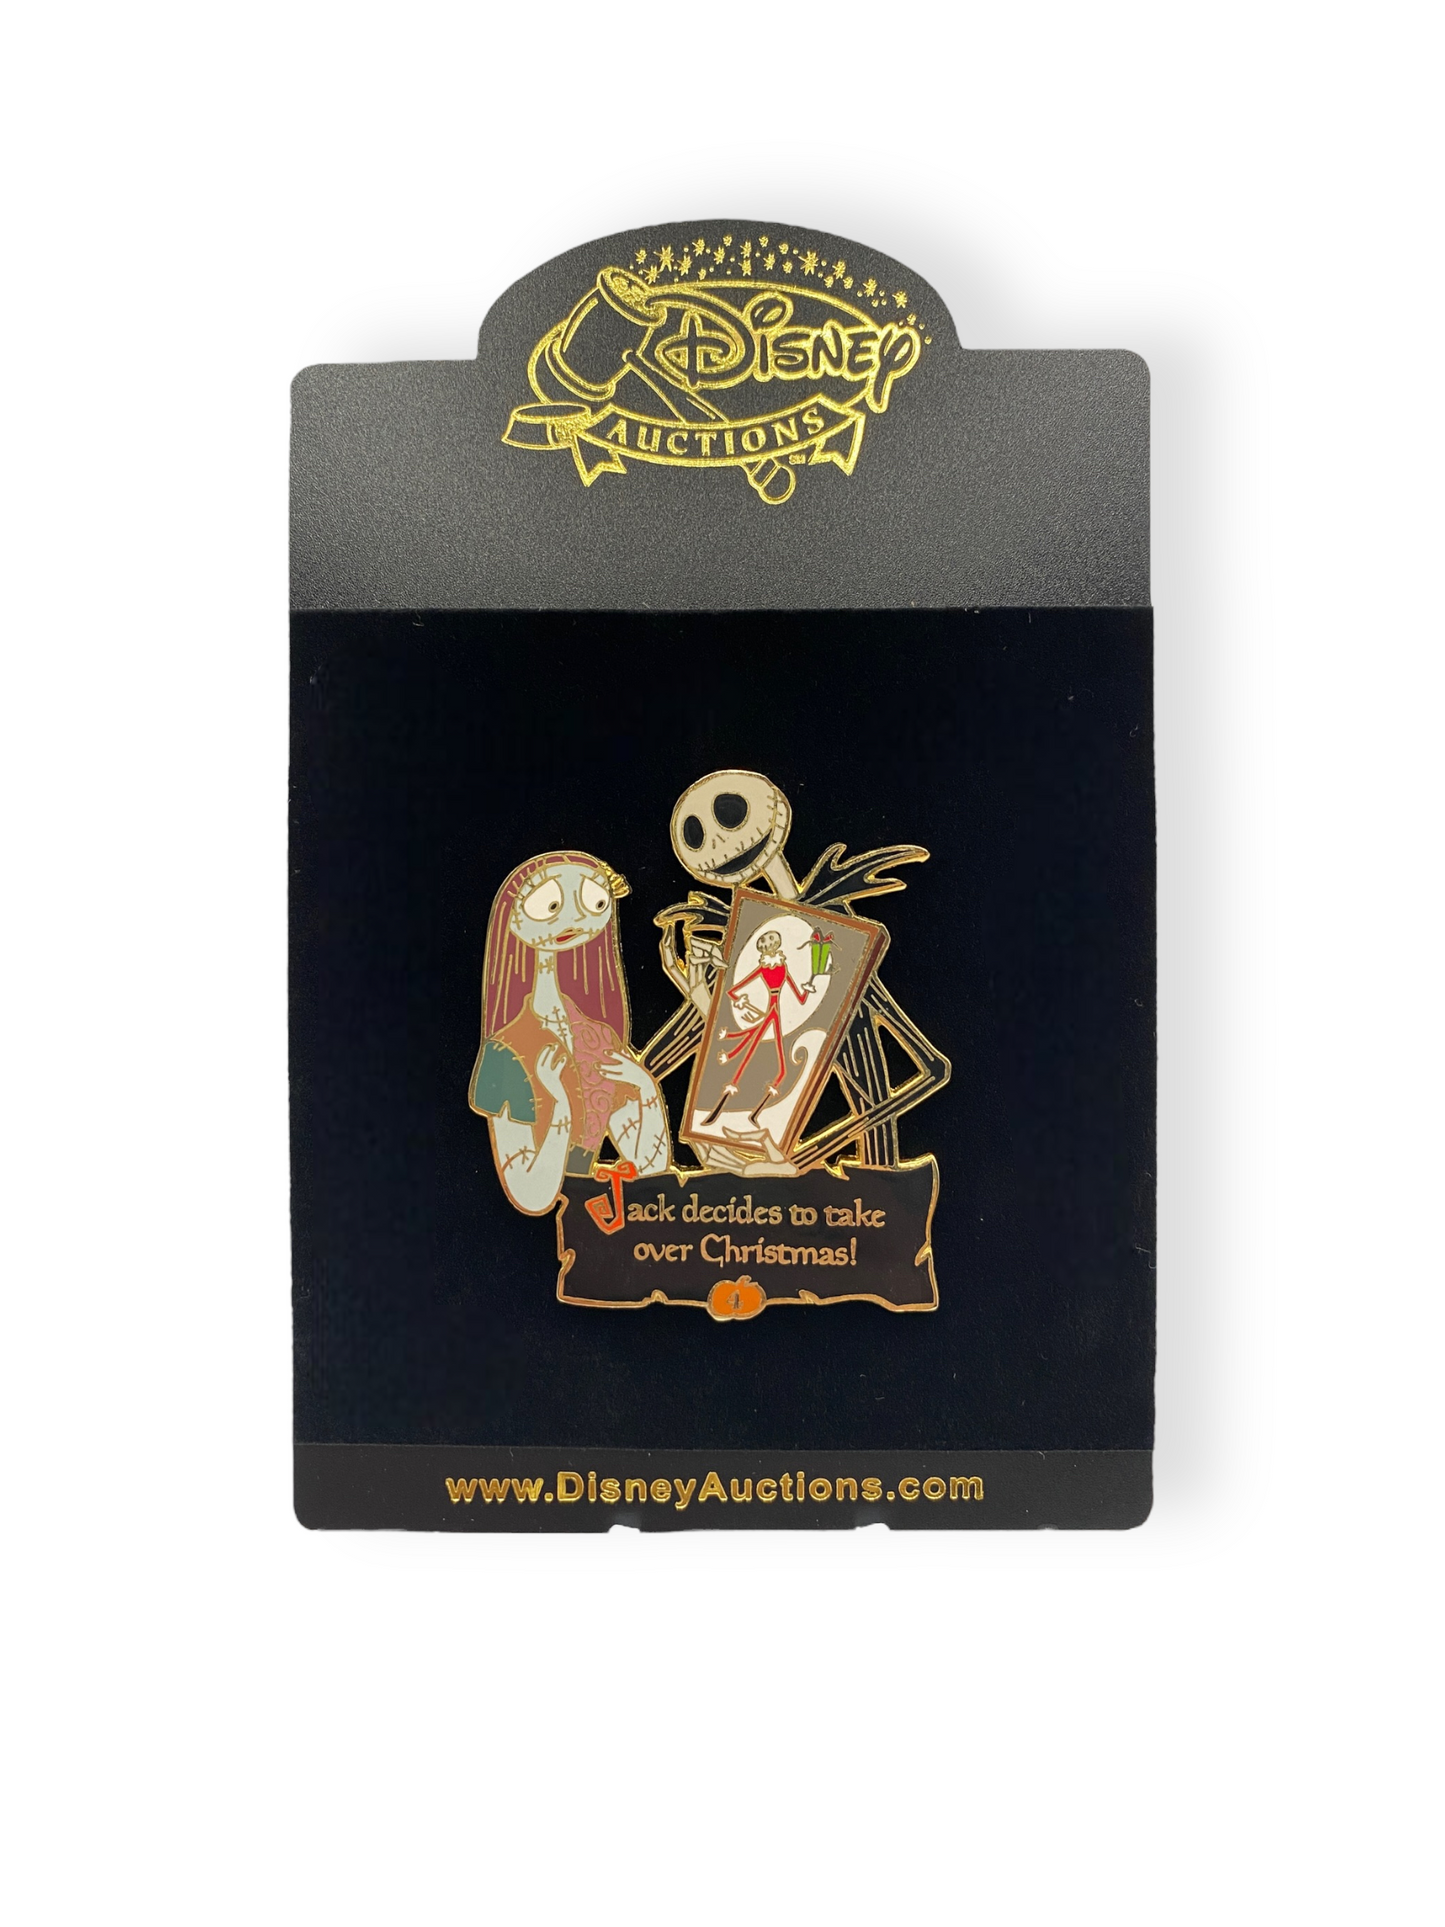 Disney Auctions The Story of The Nightmare Before Christmas 12 Pin Set